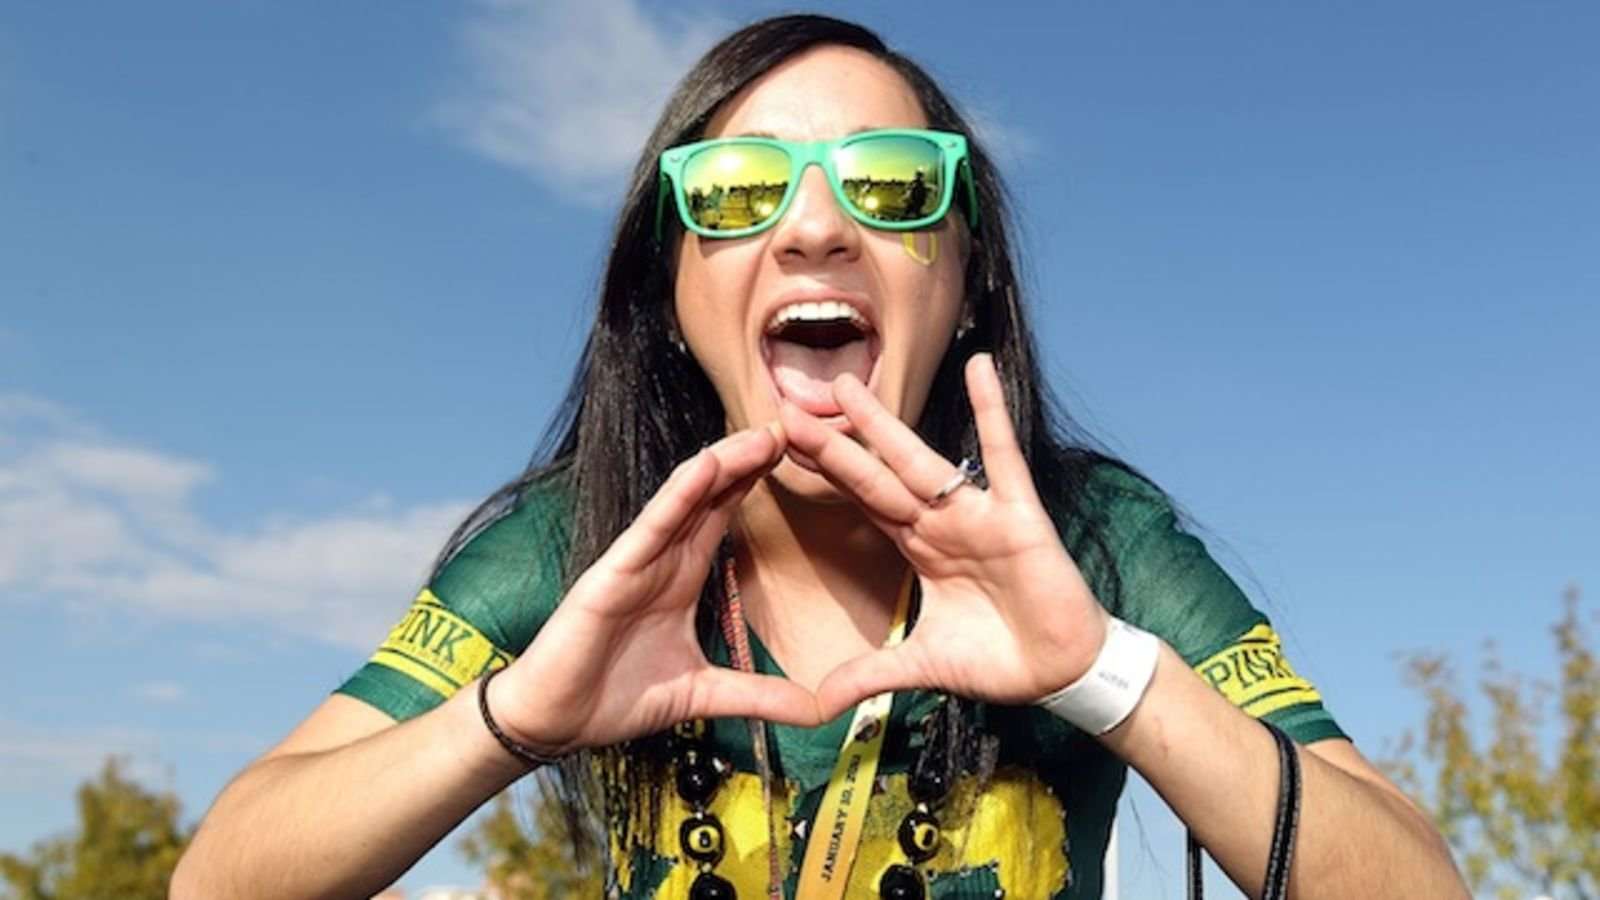 image for When Oregon Fans Make The "O" Symbol, They're Screaming "Vagina" In American Sign Language, New York Times Reports